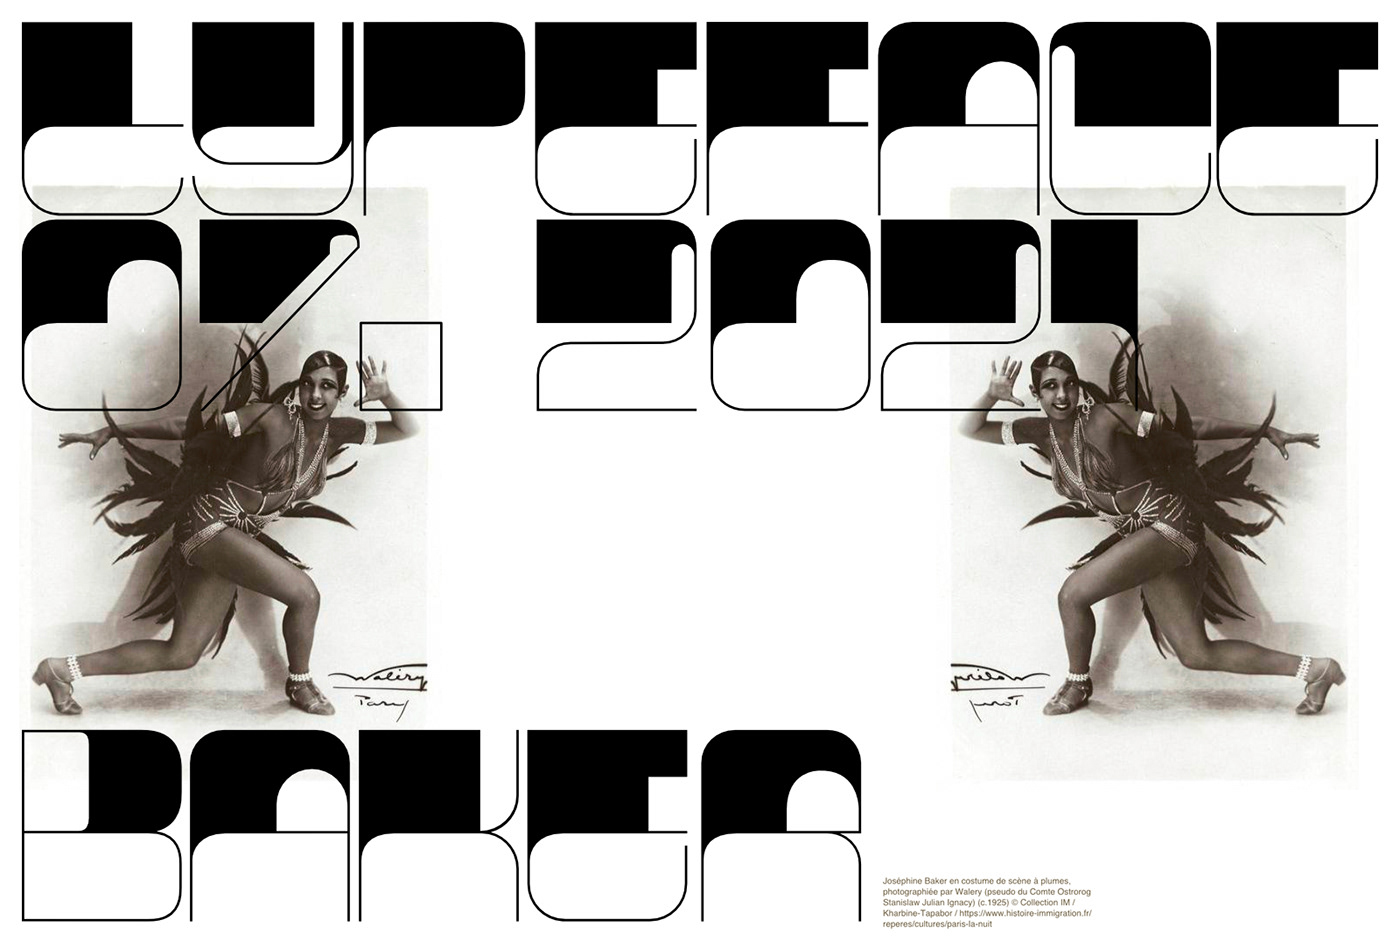 The Baker typeface is a tribute to the great artist Josephine Baker